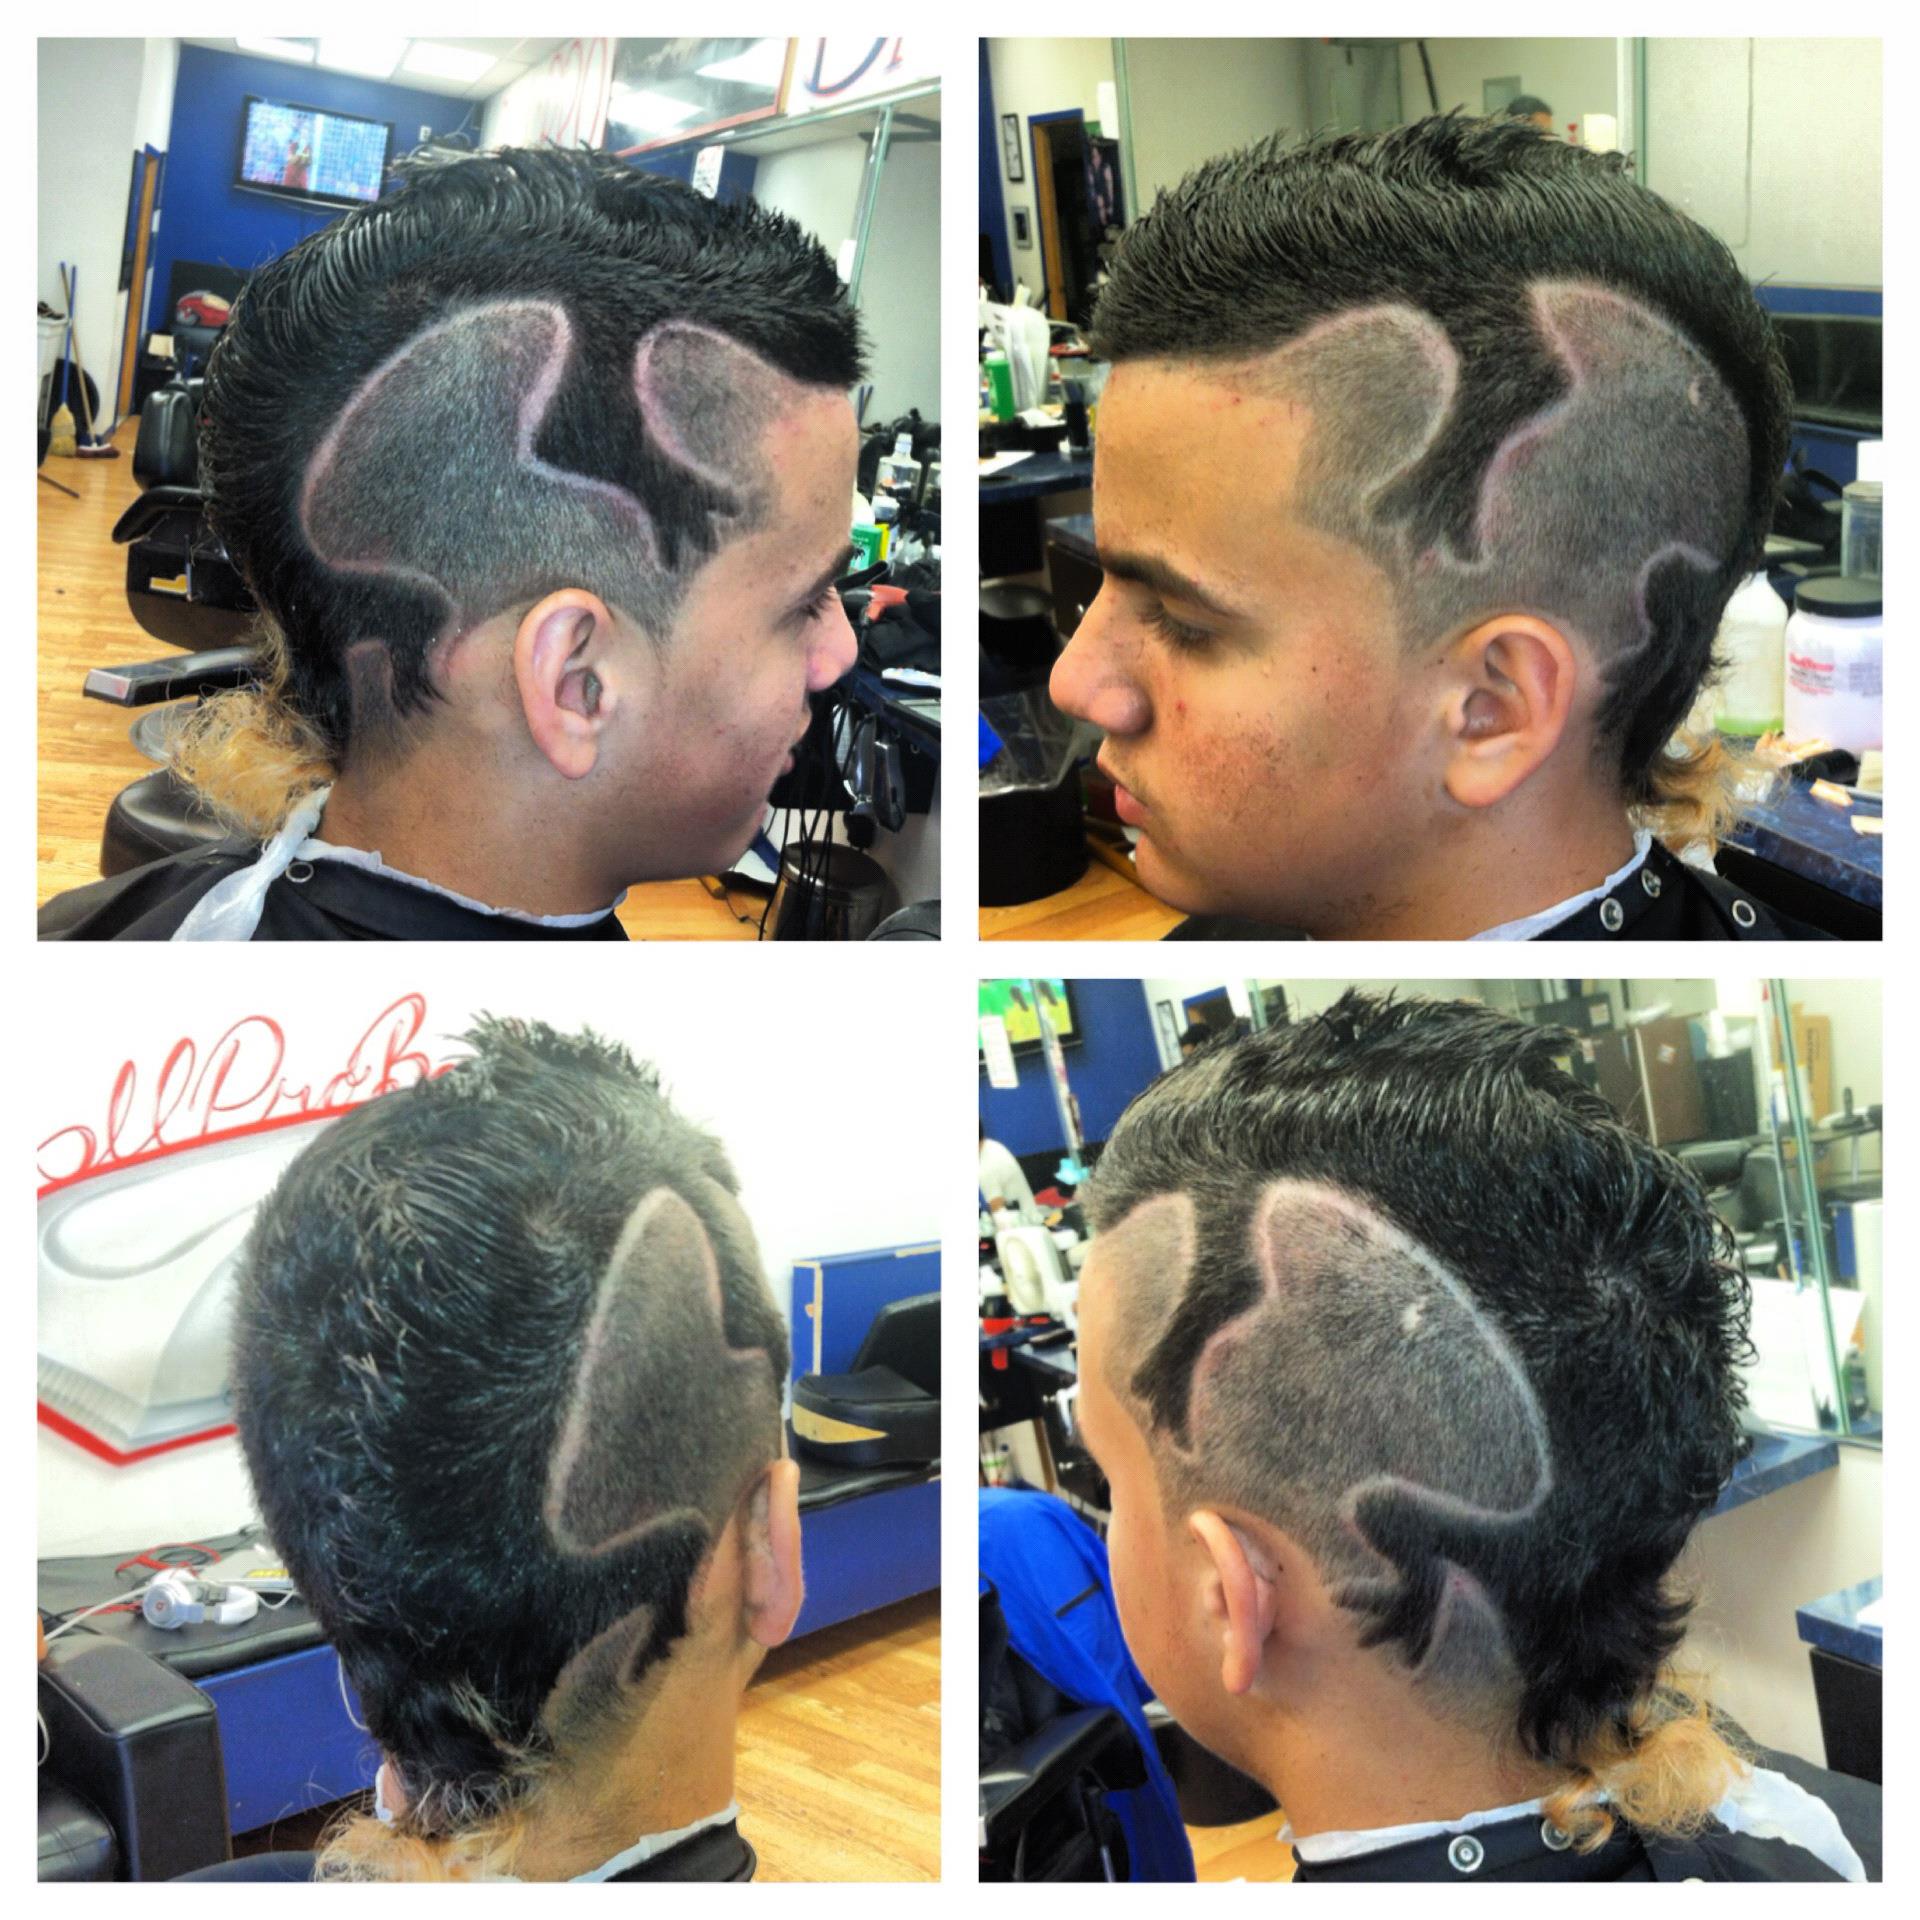 All Pro Barbers